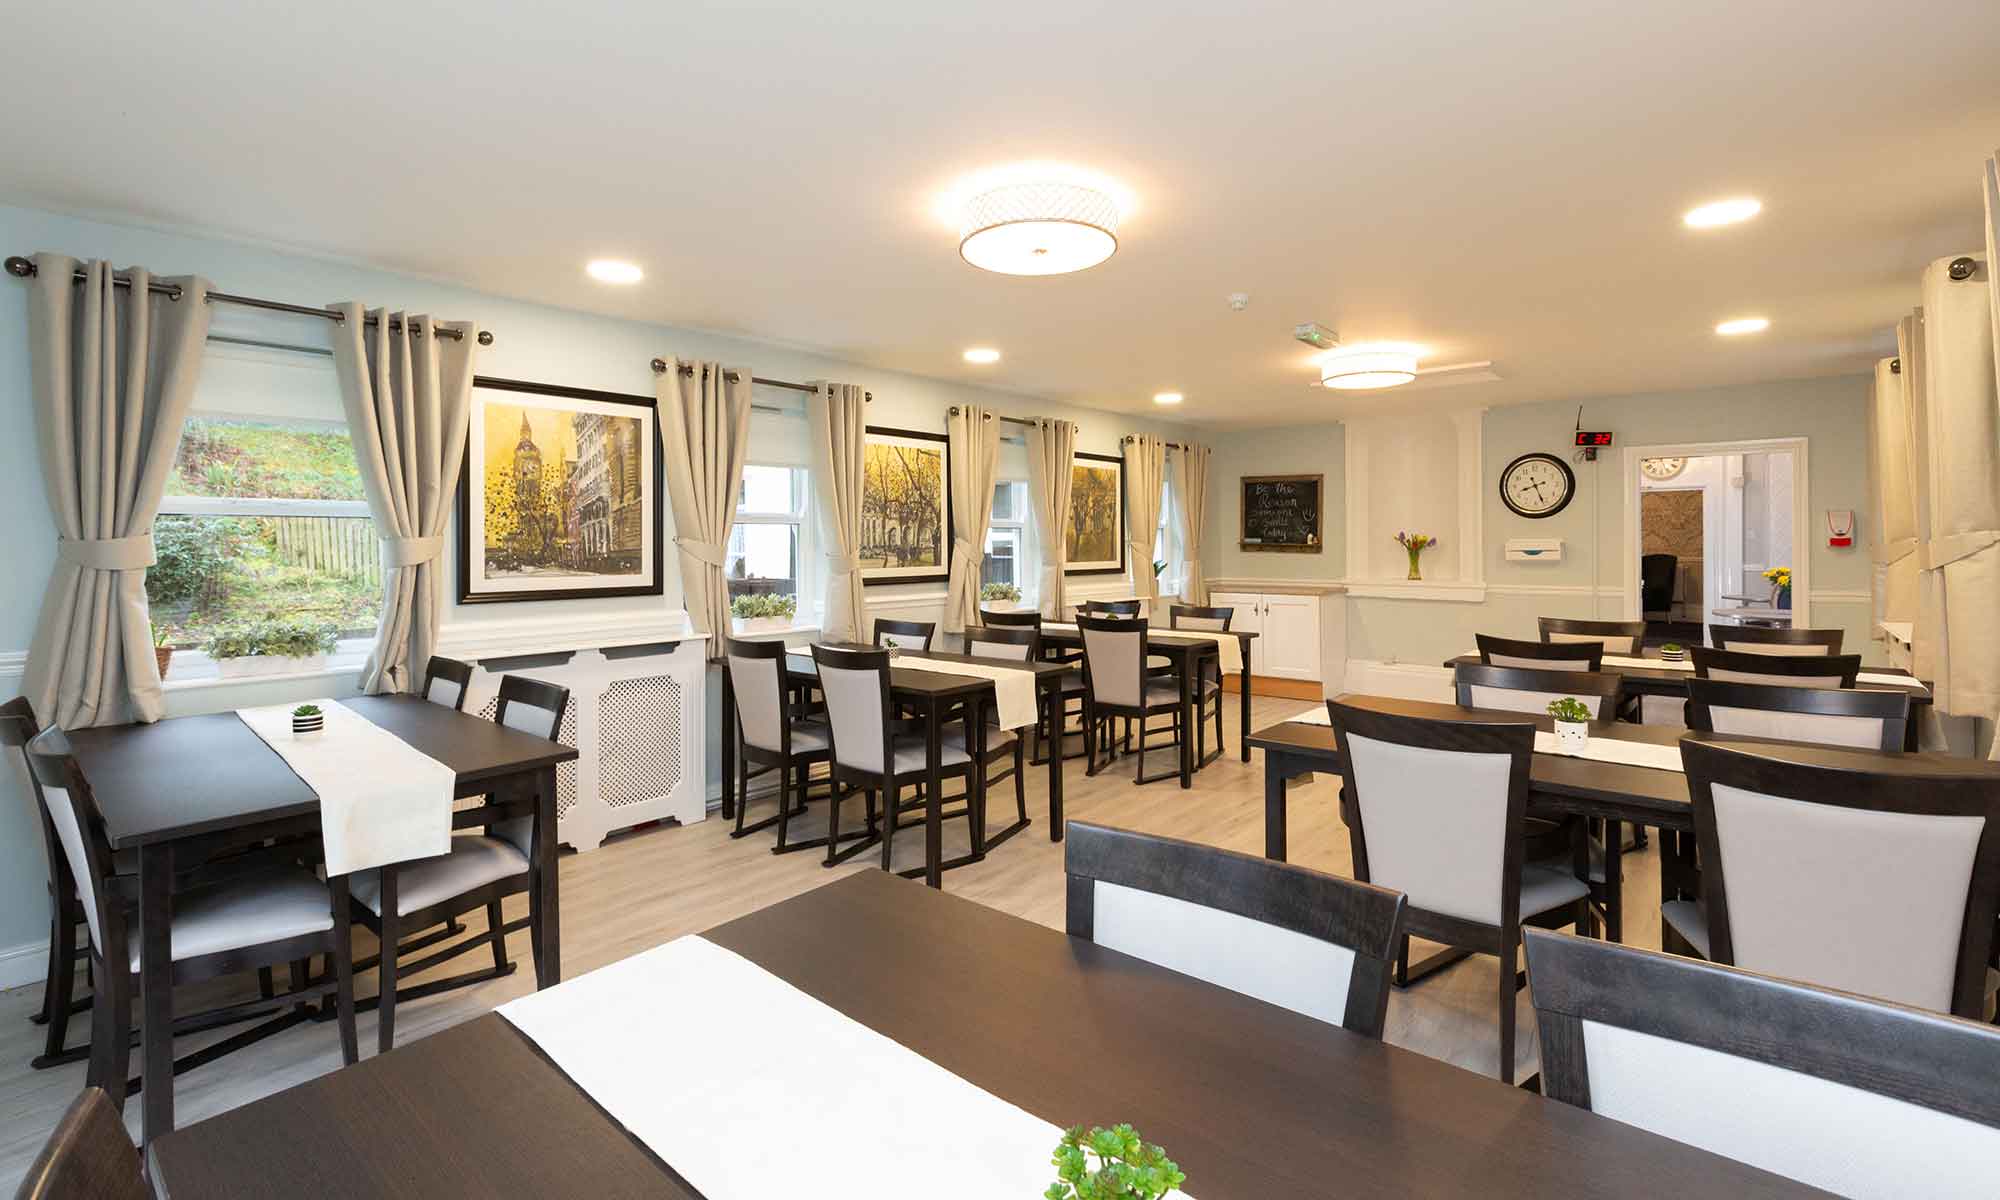 Dining room at Netwon Hall Care Home with SH dining tables and Sienna dining chairs.